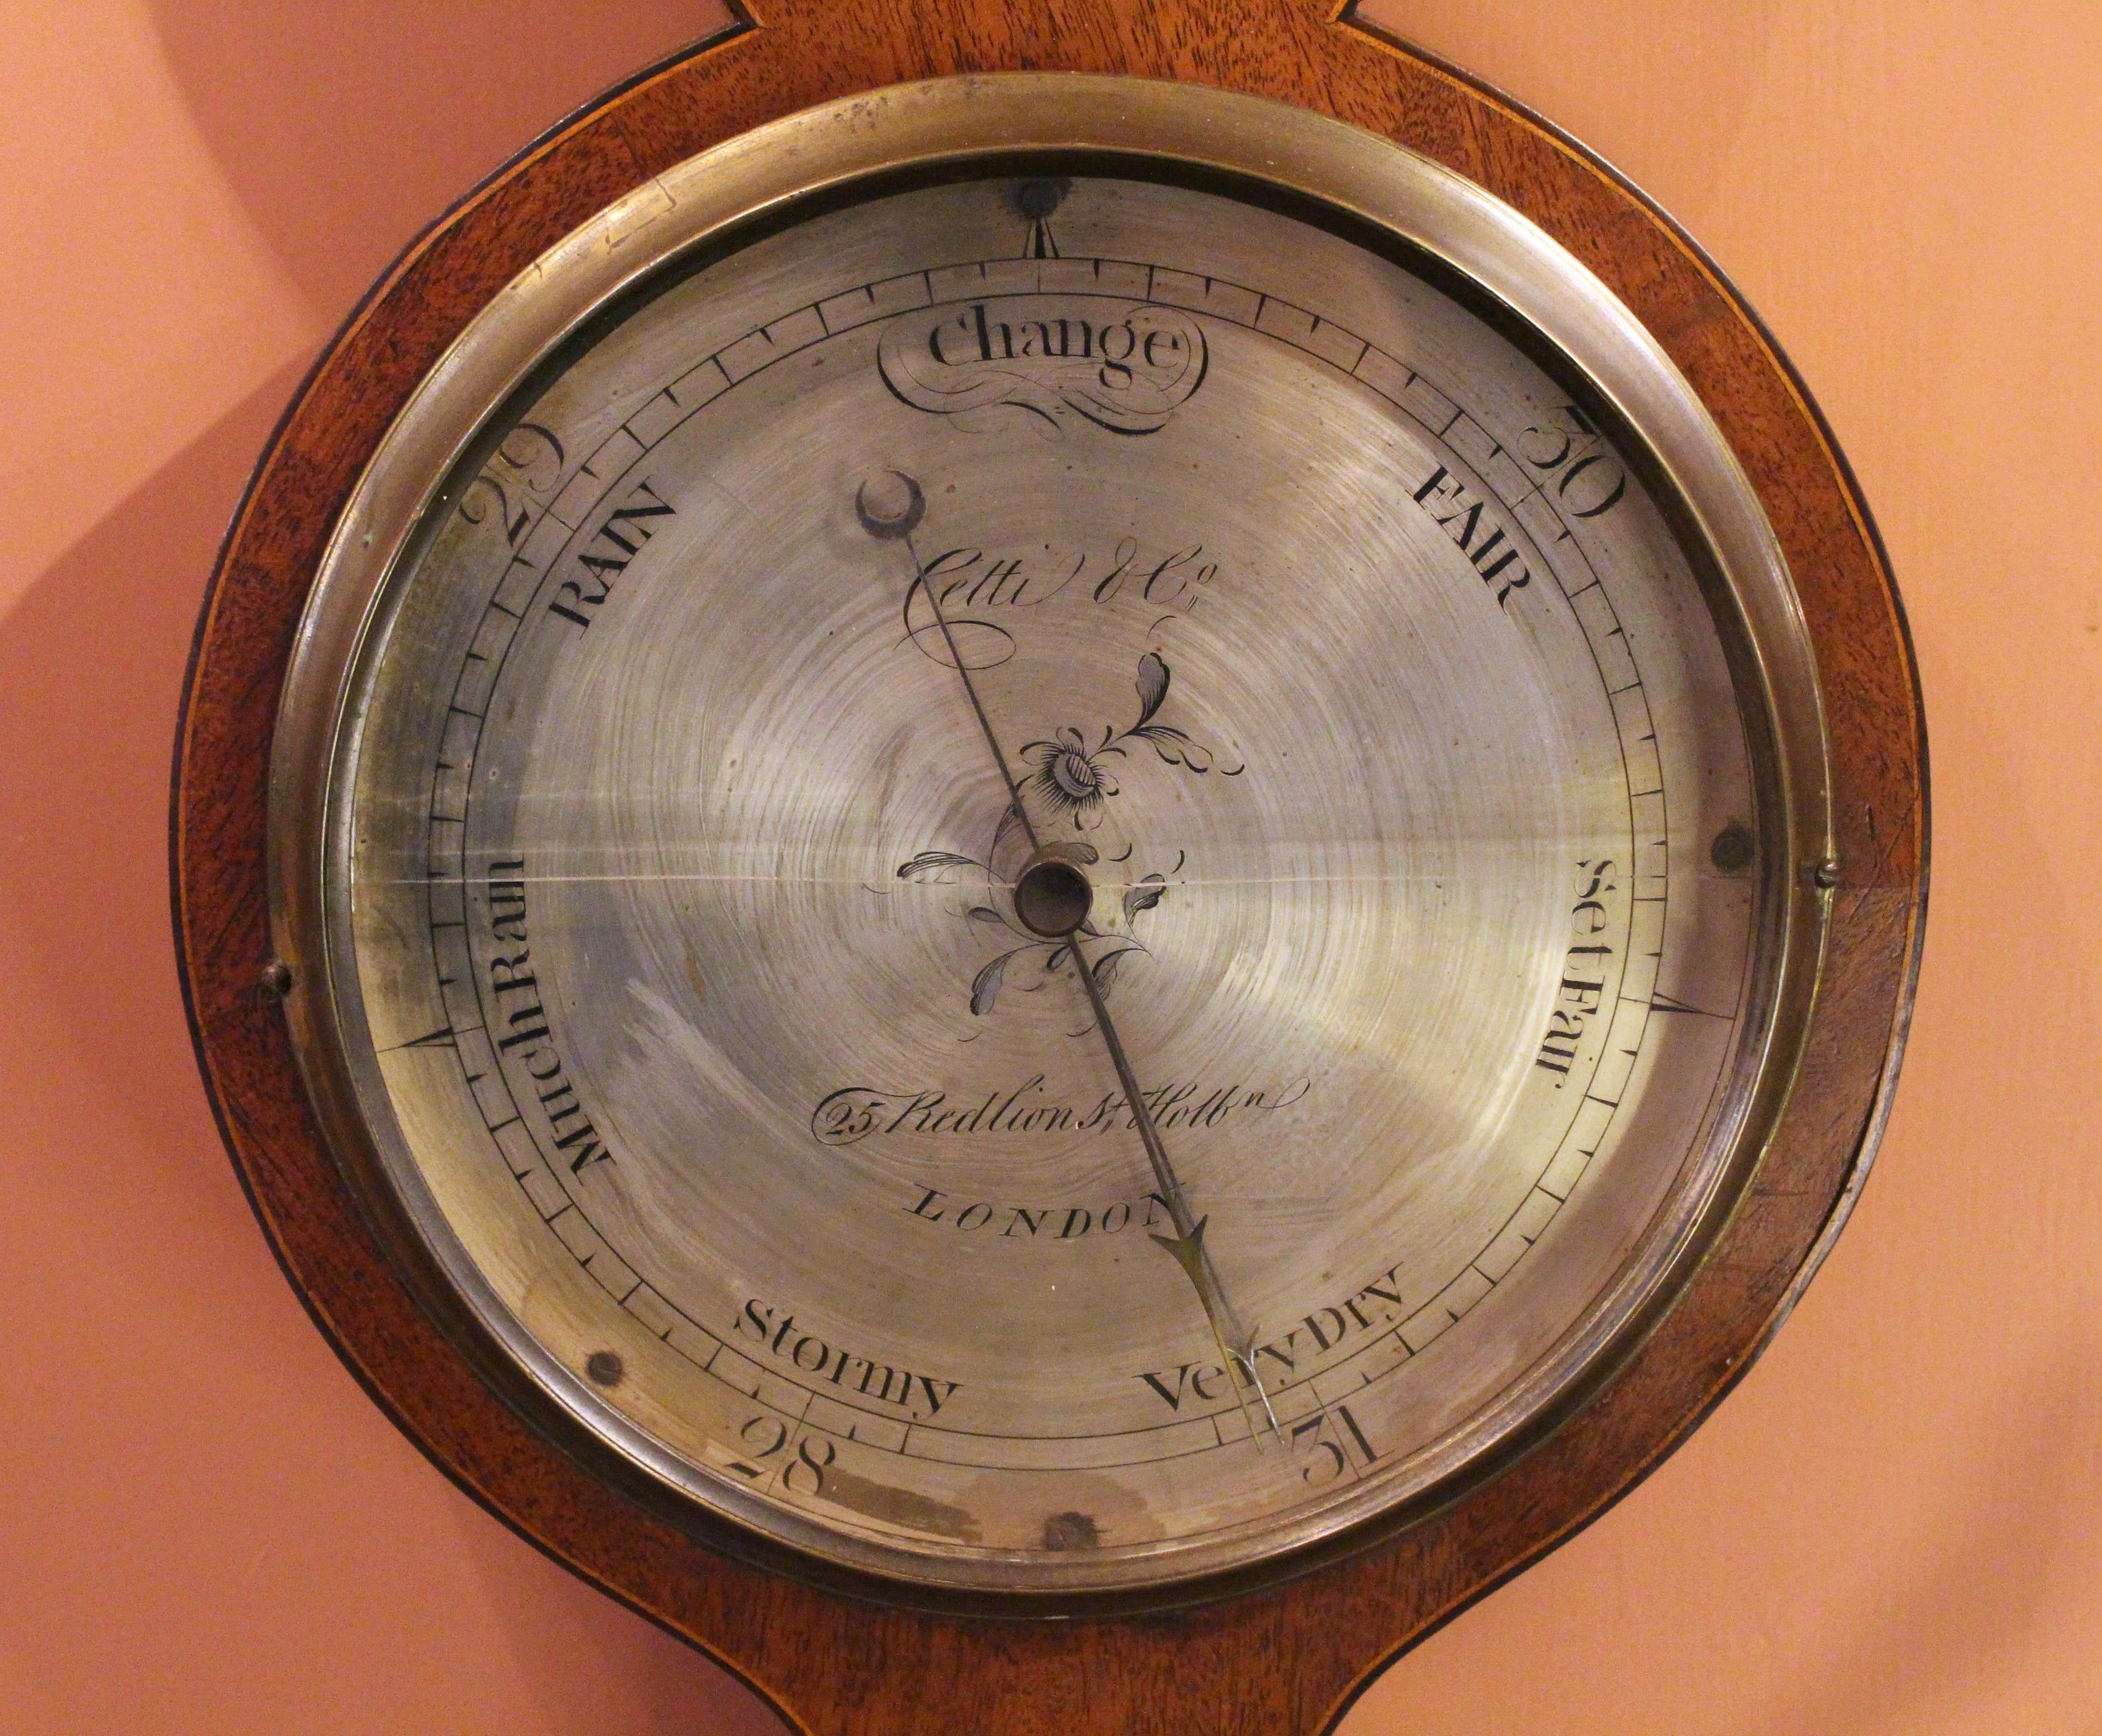 1816-1829 barometer by Cetti & Co, 25 Red Lion St., Holburn, London. Mahogany with conch shell & rosette inlays. George III period. Not currently working. The original finial is fire gilt. Broken arch pediment is original. Provenance from a 1957